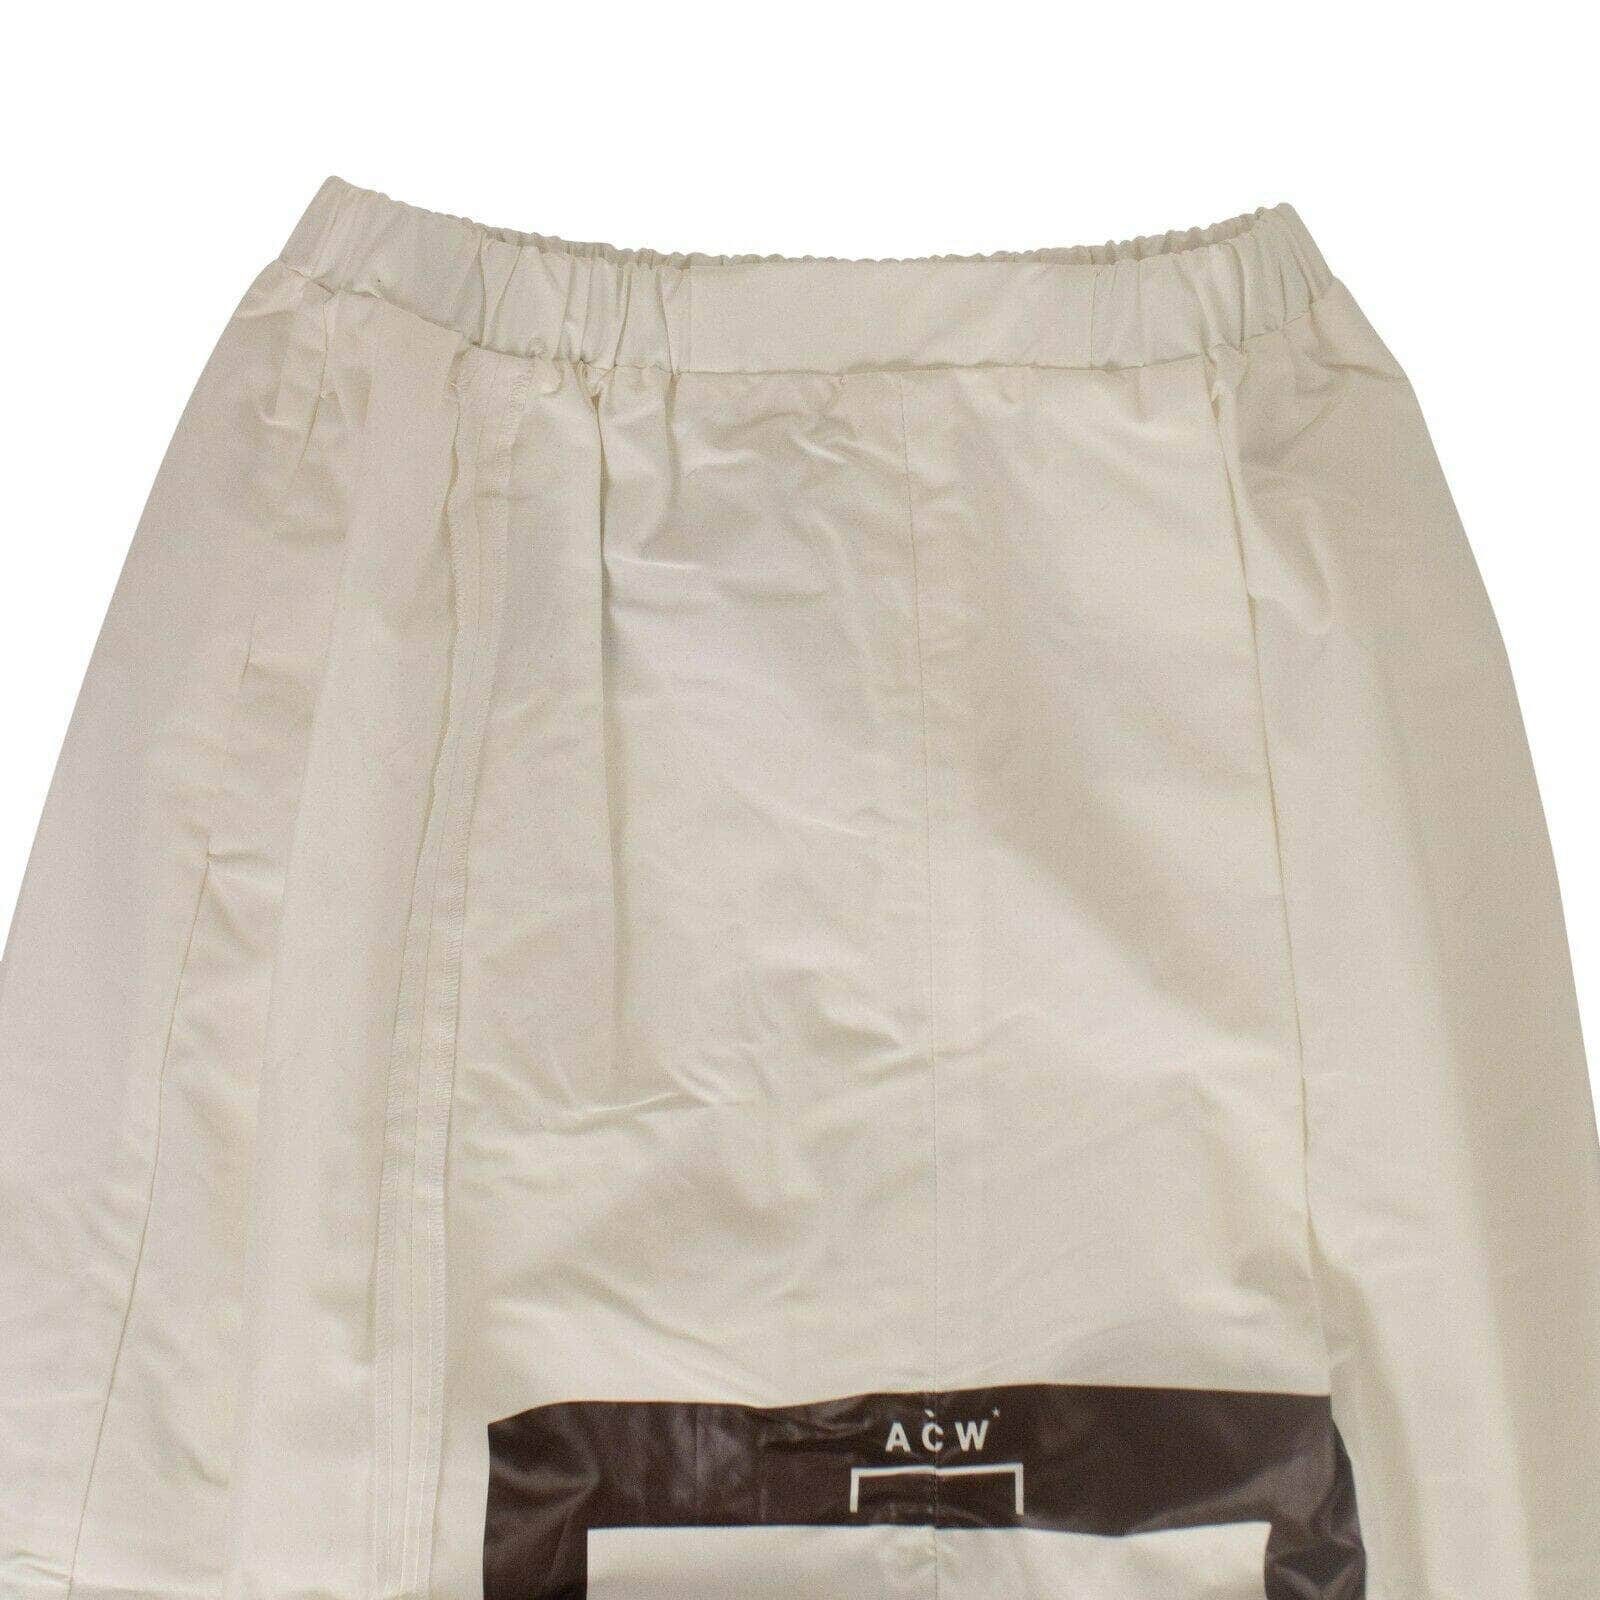 A-COLD-WALL* 250-500, a-cold-wall, couponcollection, gender-womens, main-clothing, size-m, size-s, womens-skirts S Cotton Snap Midi Skirt - White 87AB-ACW-1026/S 87AB-ACW-1026/S